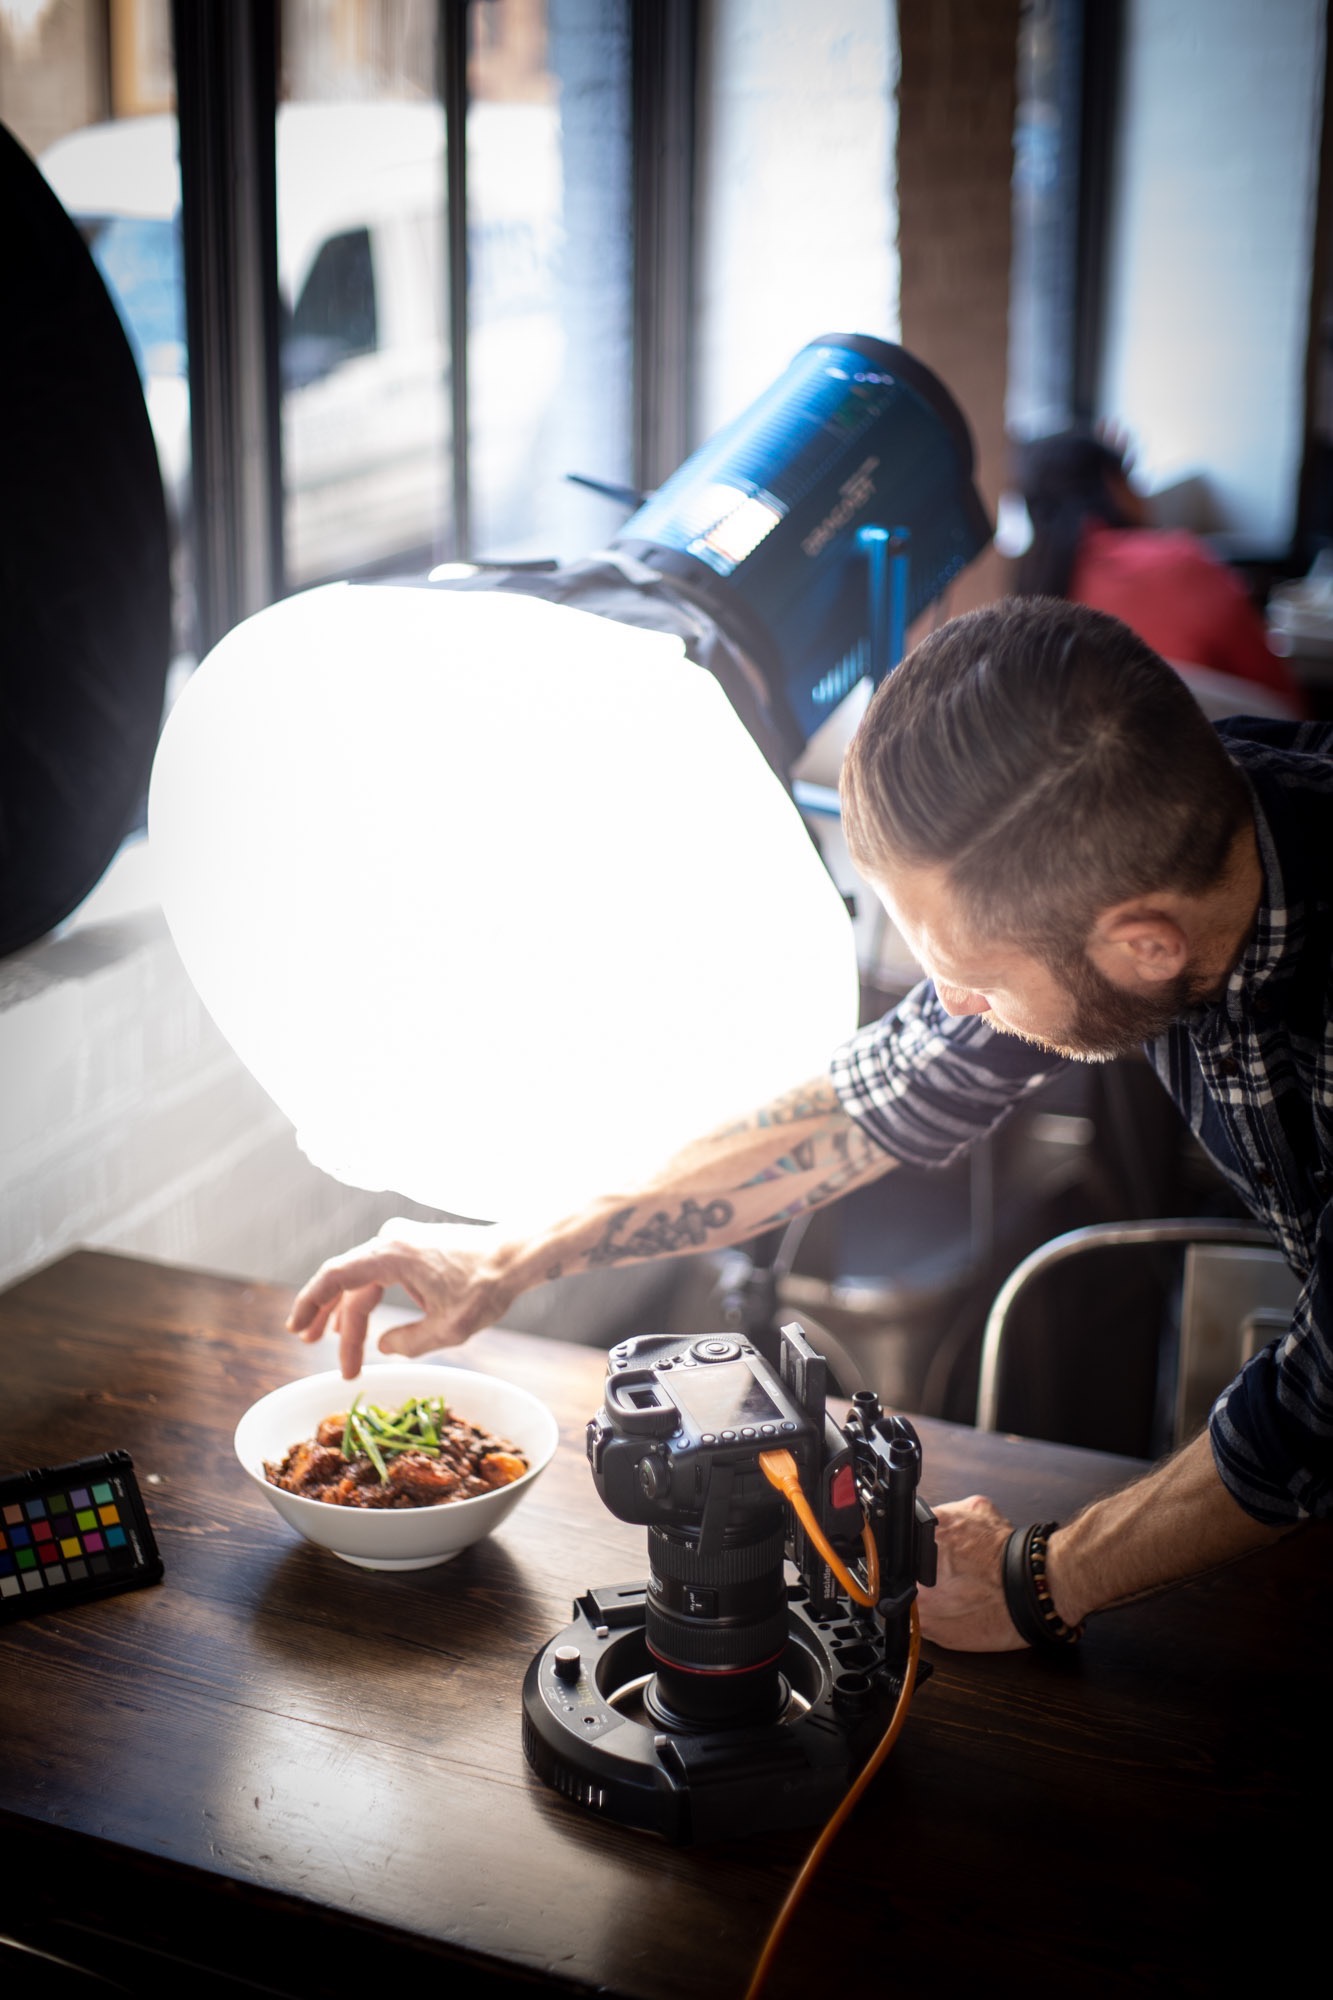 A chef food styling his food for a photoshoot